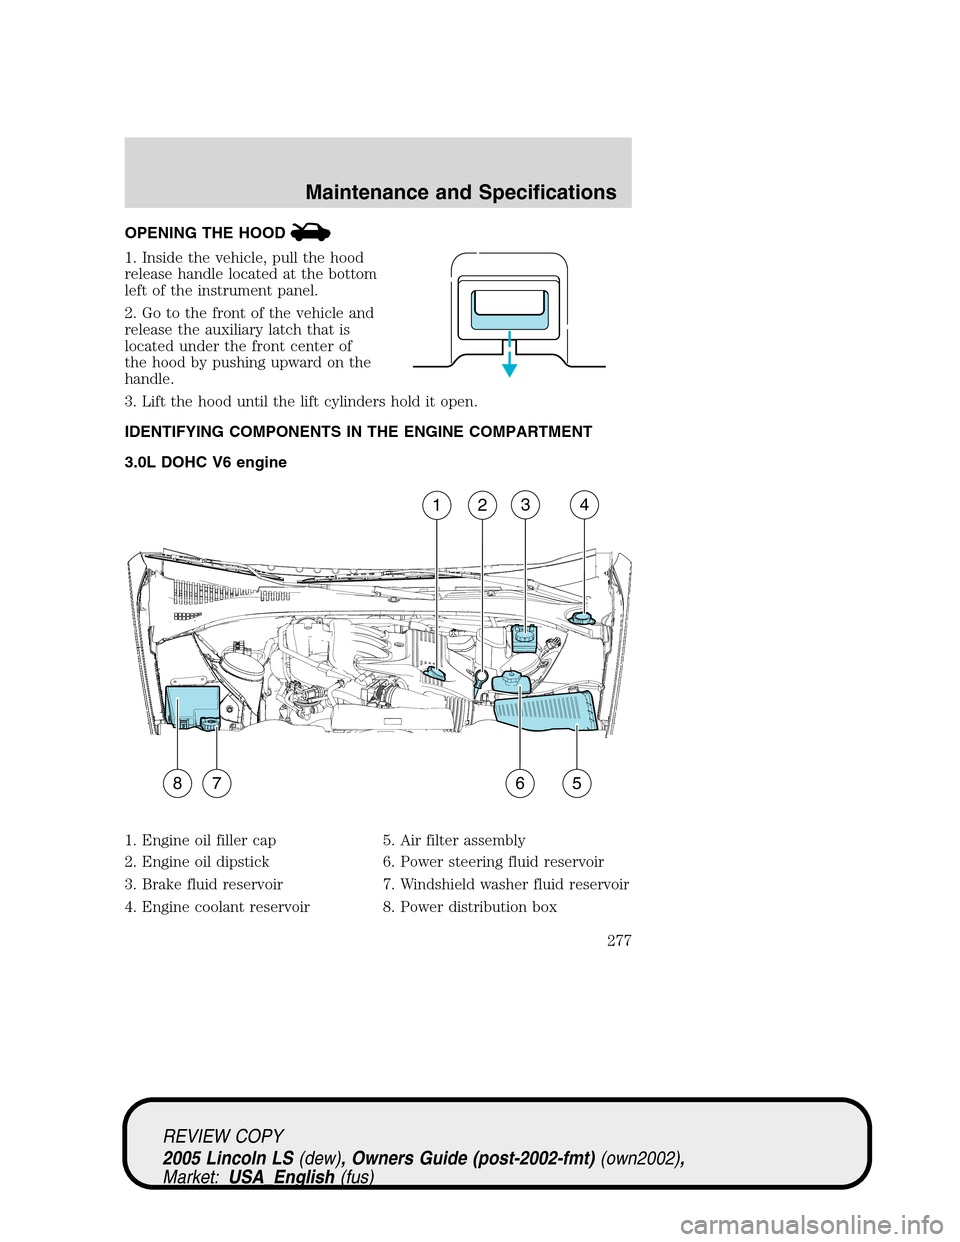 LINCOLN LS 2005  Owners Manual OPENING THE HOOD
1. Inside the vehicle, pull the hood
release handle located at the bottom
left of the instrument panel.
2. Go to the front of the vehicle and
release the auxiliary latch that is
locat